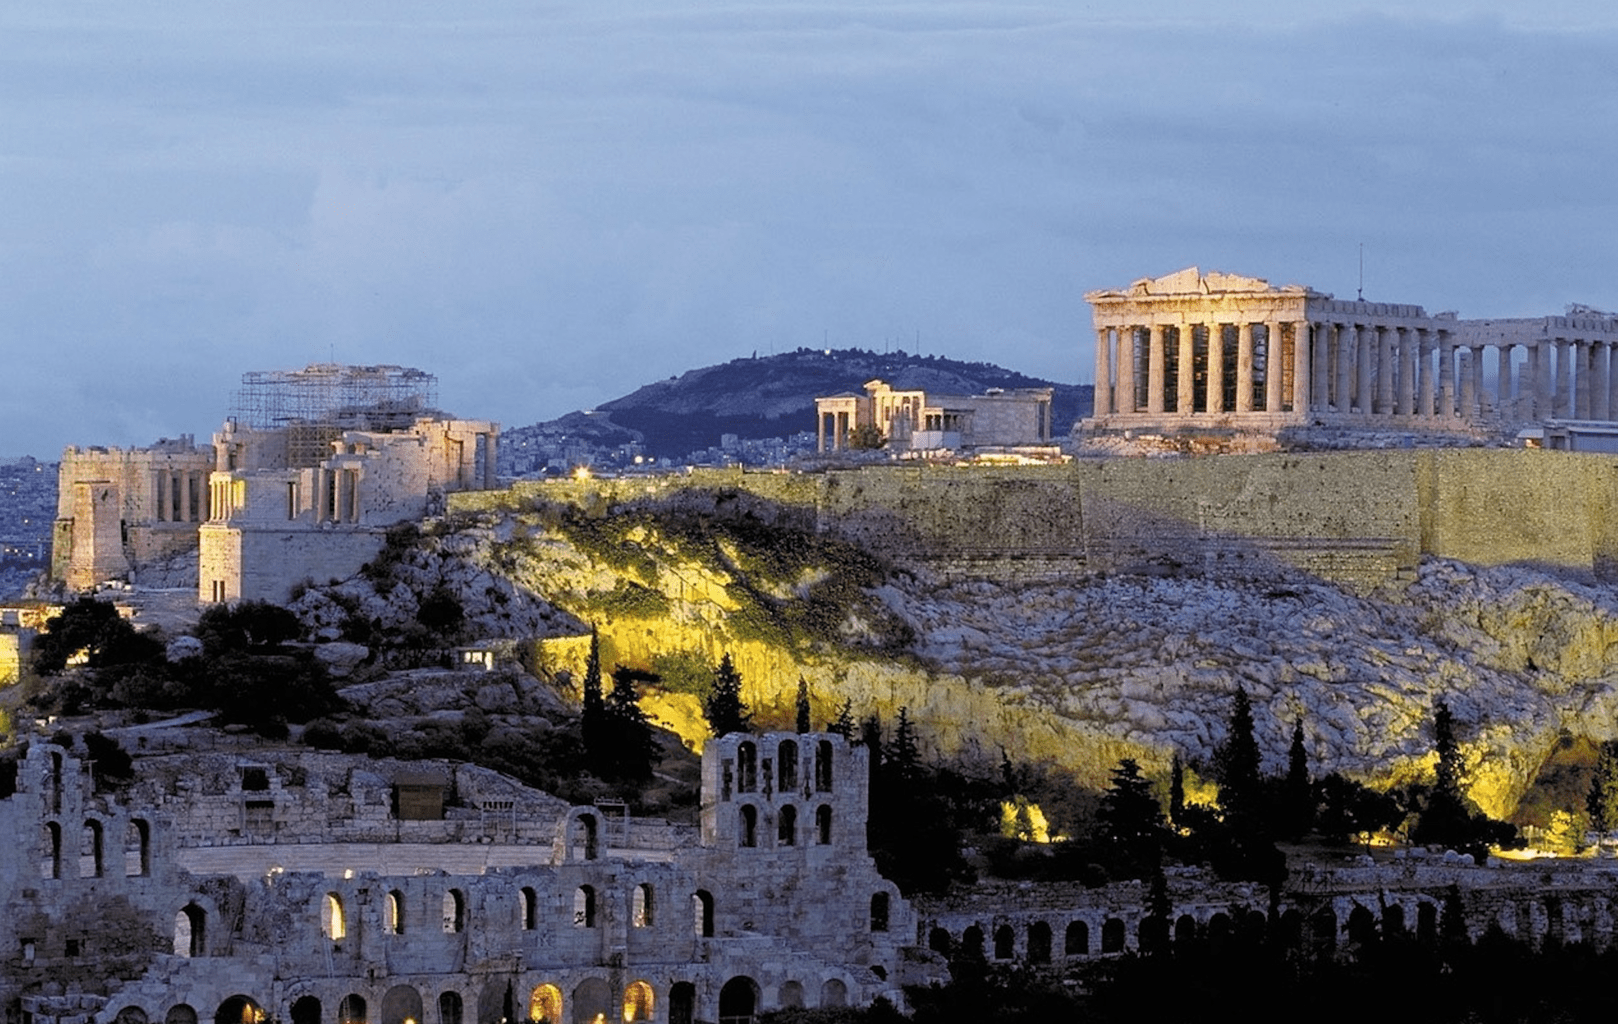 Greece is one of the most googled destinations for post-lockdown holidays